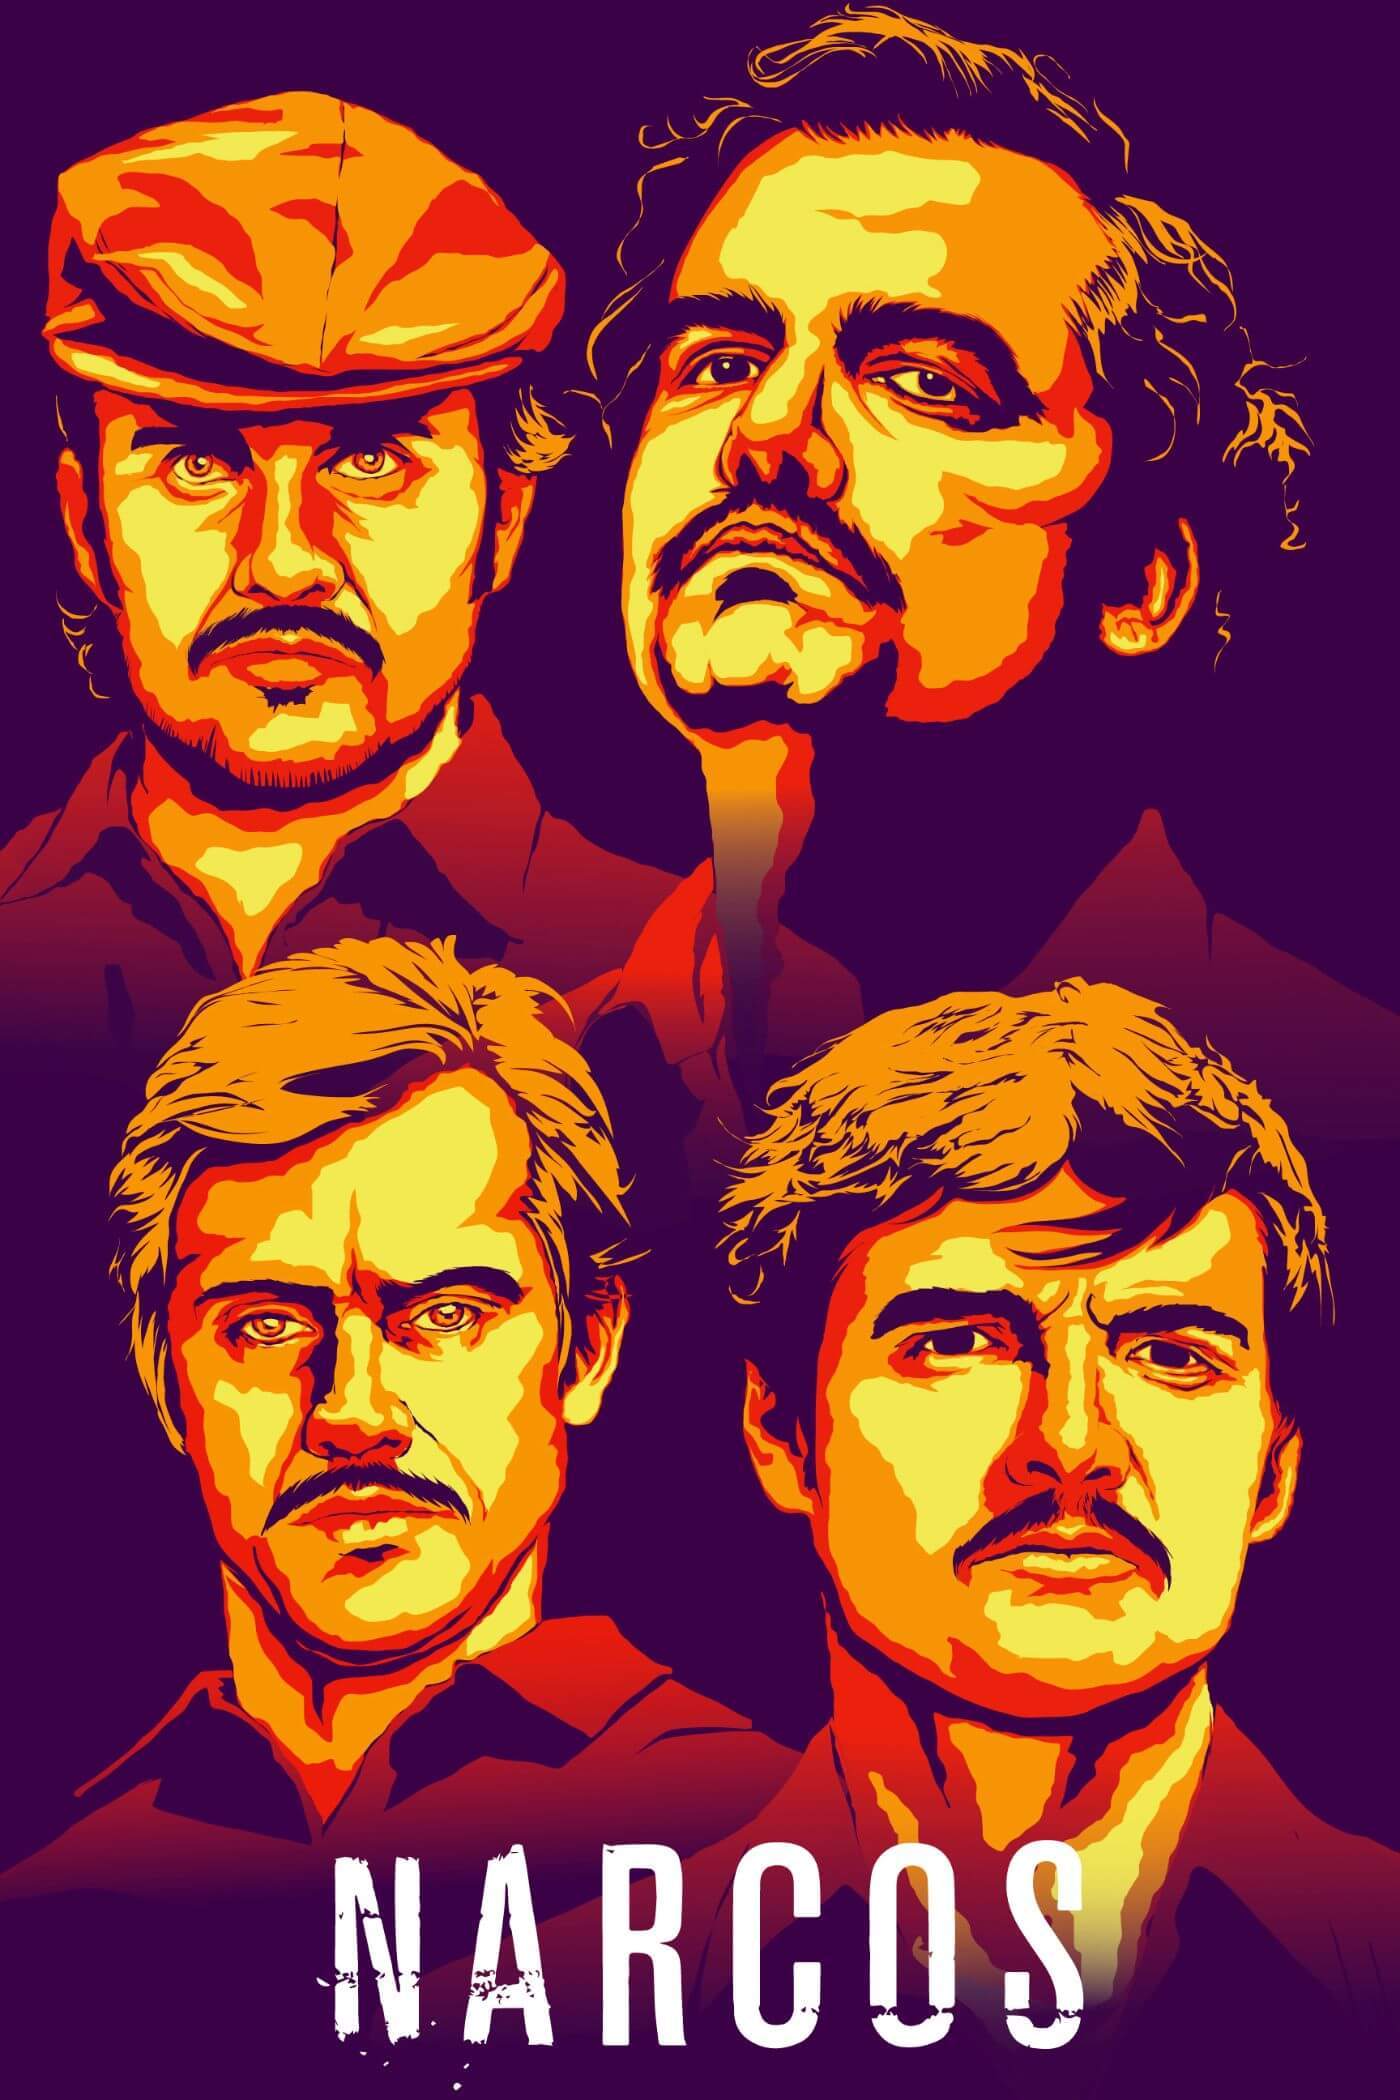 Narcos - Pablo Escobar Netflix TV Show Poster - Fan Art - Canvas Prints by Tallenge Store Buy Posters, Frames, Canvas & Digital Art Prints | Small, Compact, Medium and Large Variants